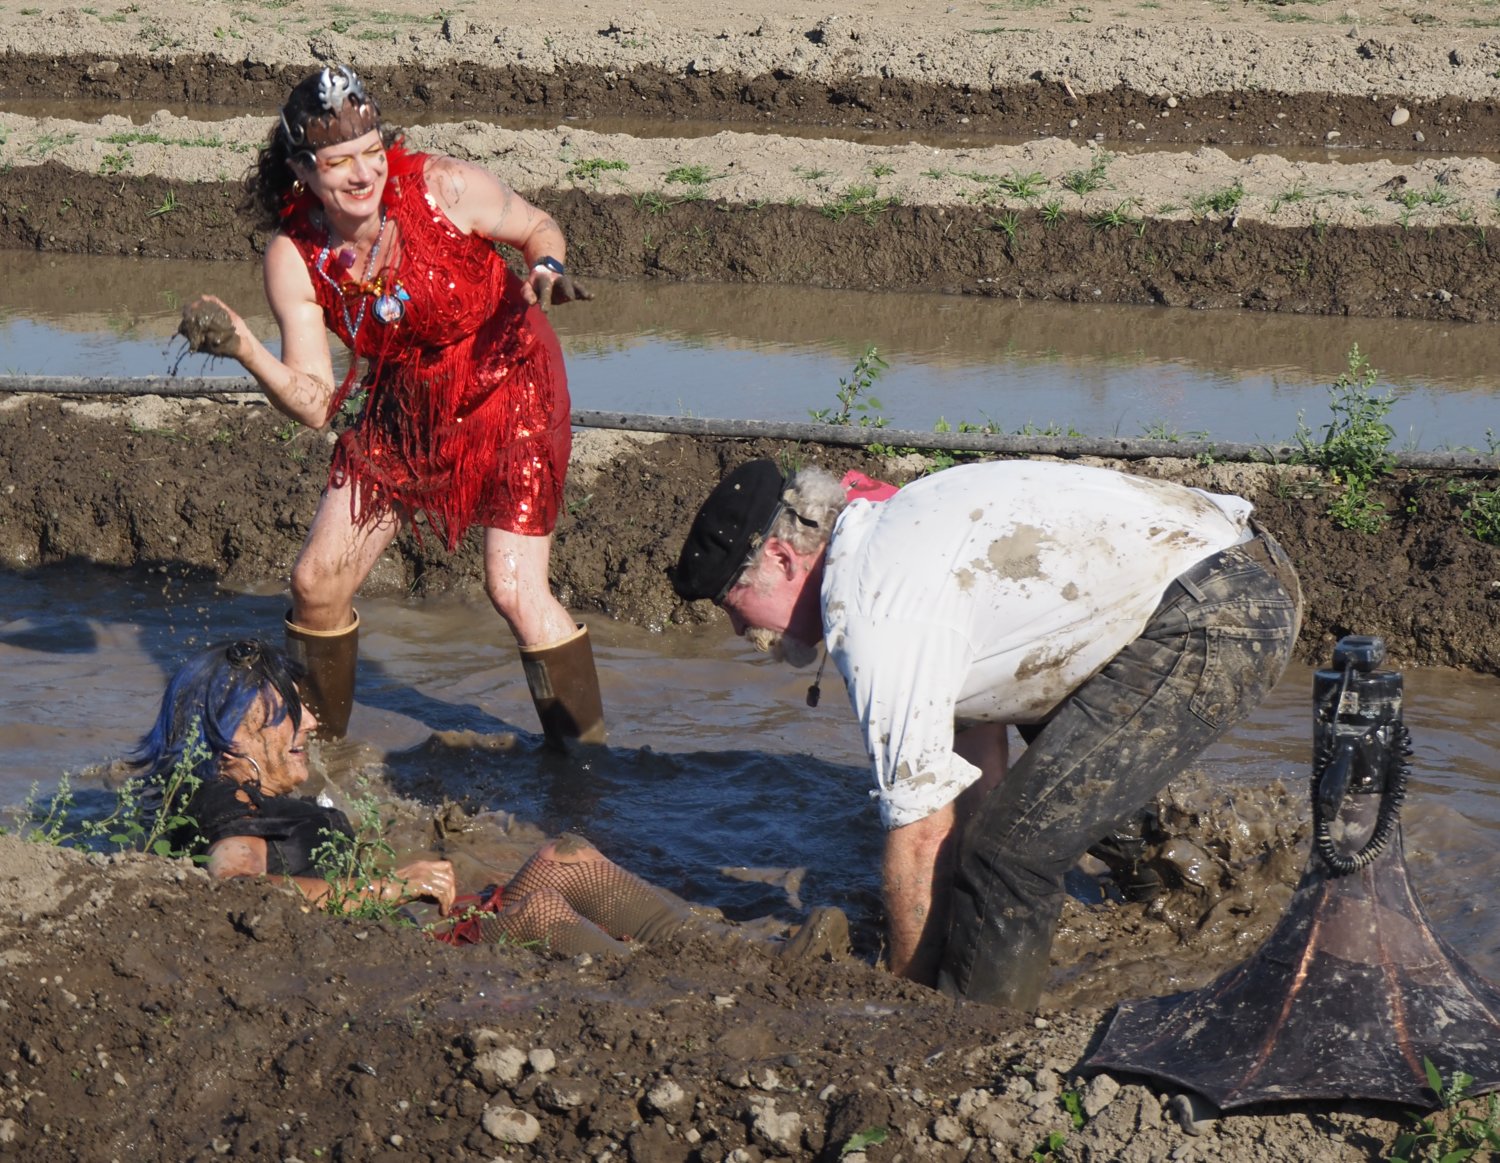 Newly elected Kween Pheanamix, aka Anami Cloud, proves her might in the mud over Kimberly Snow, fully immersed in the muck, and Nathan Barnett.